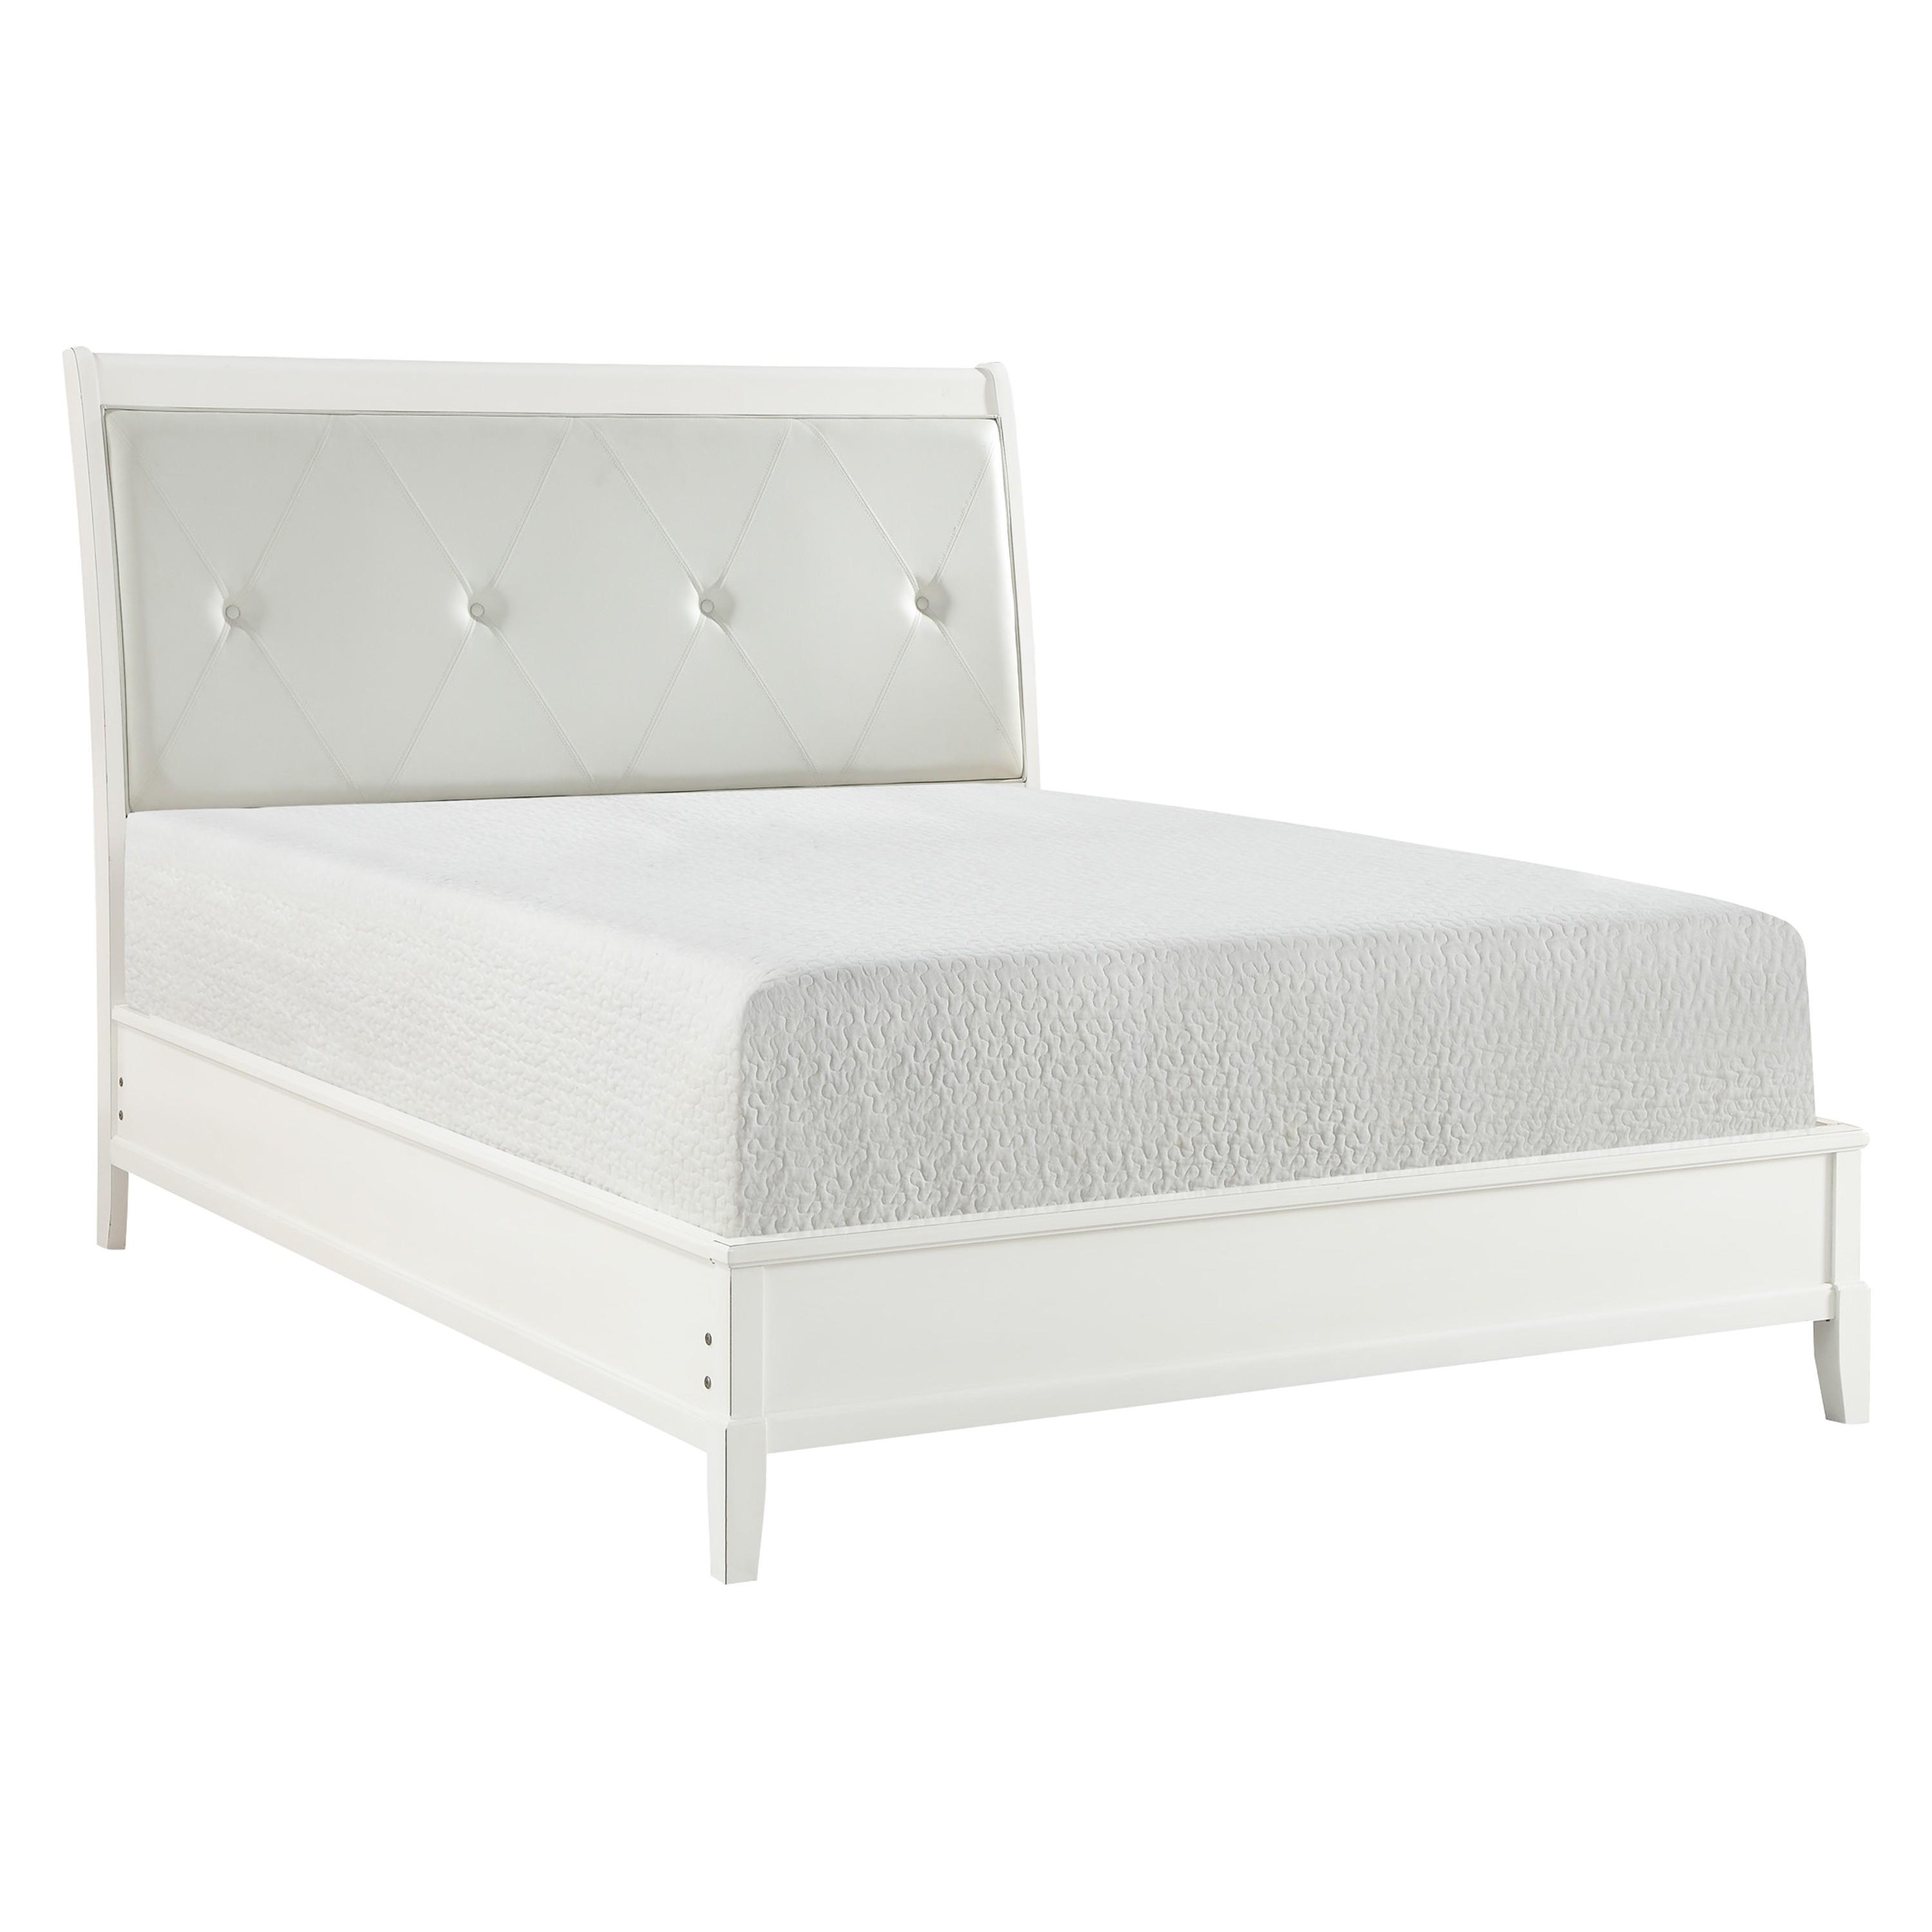 Transitional Bed 1730KWW-1CK* Cotterill 1730KWW-1CK* in Antique White Faux Leather